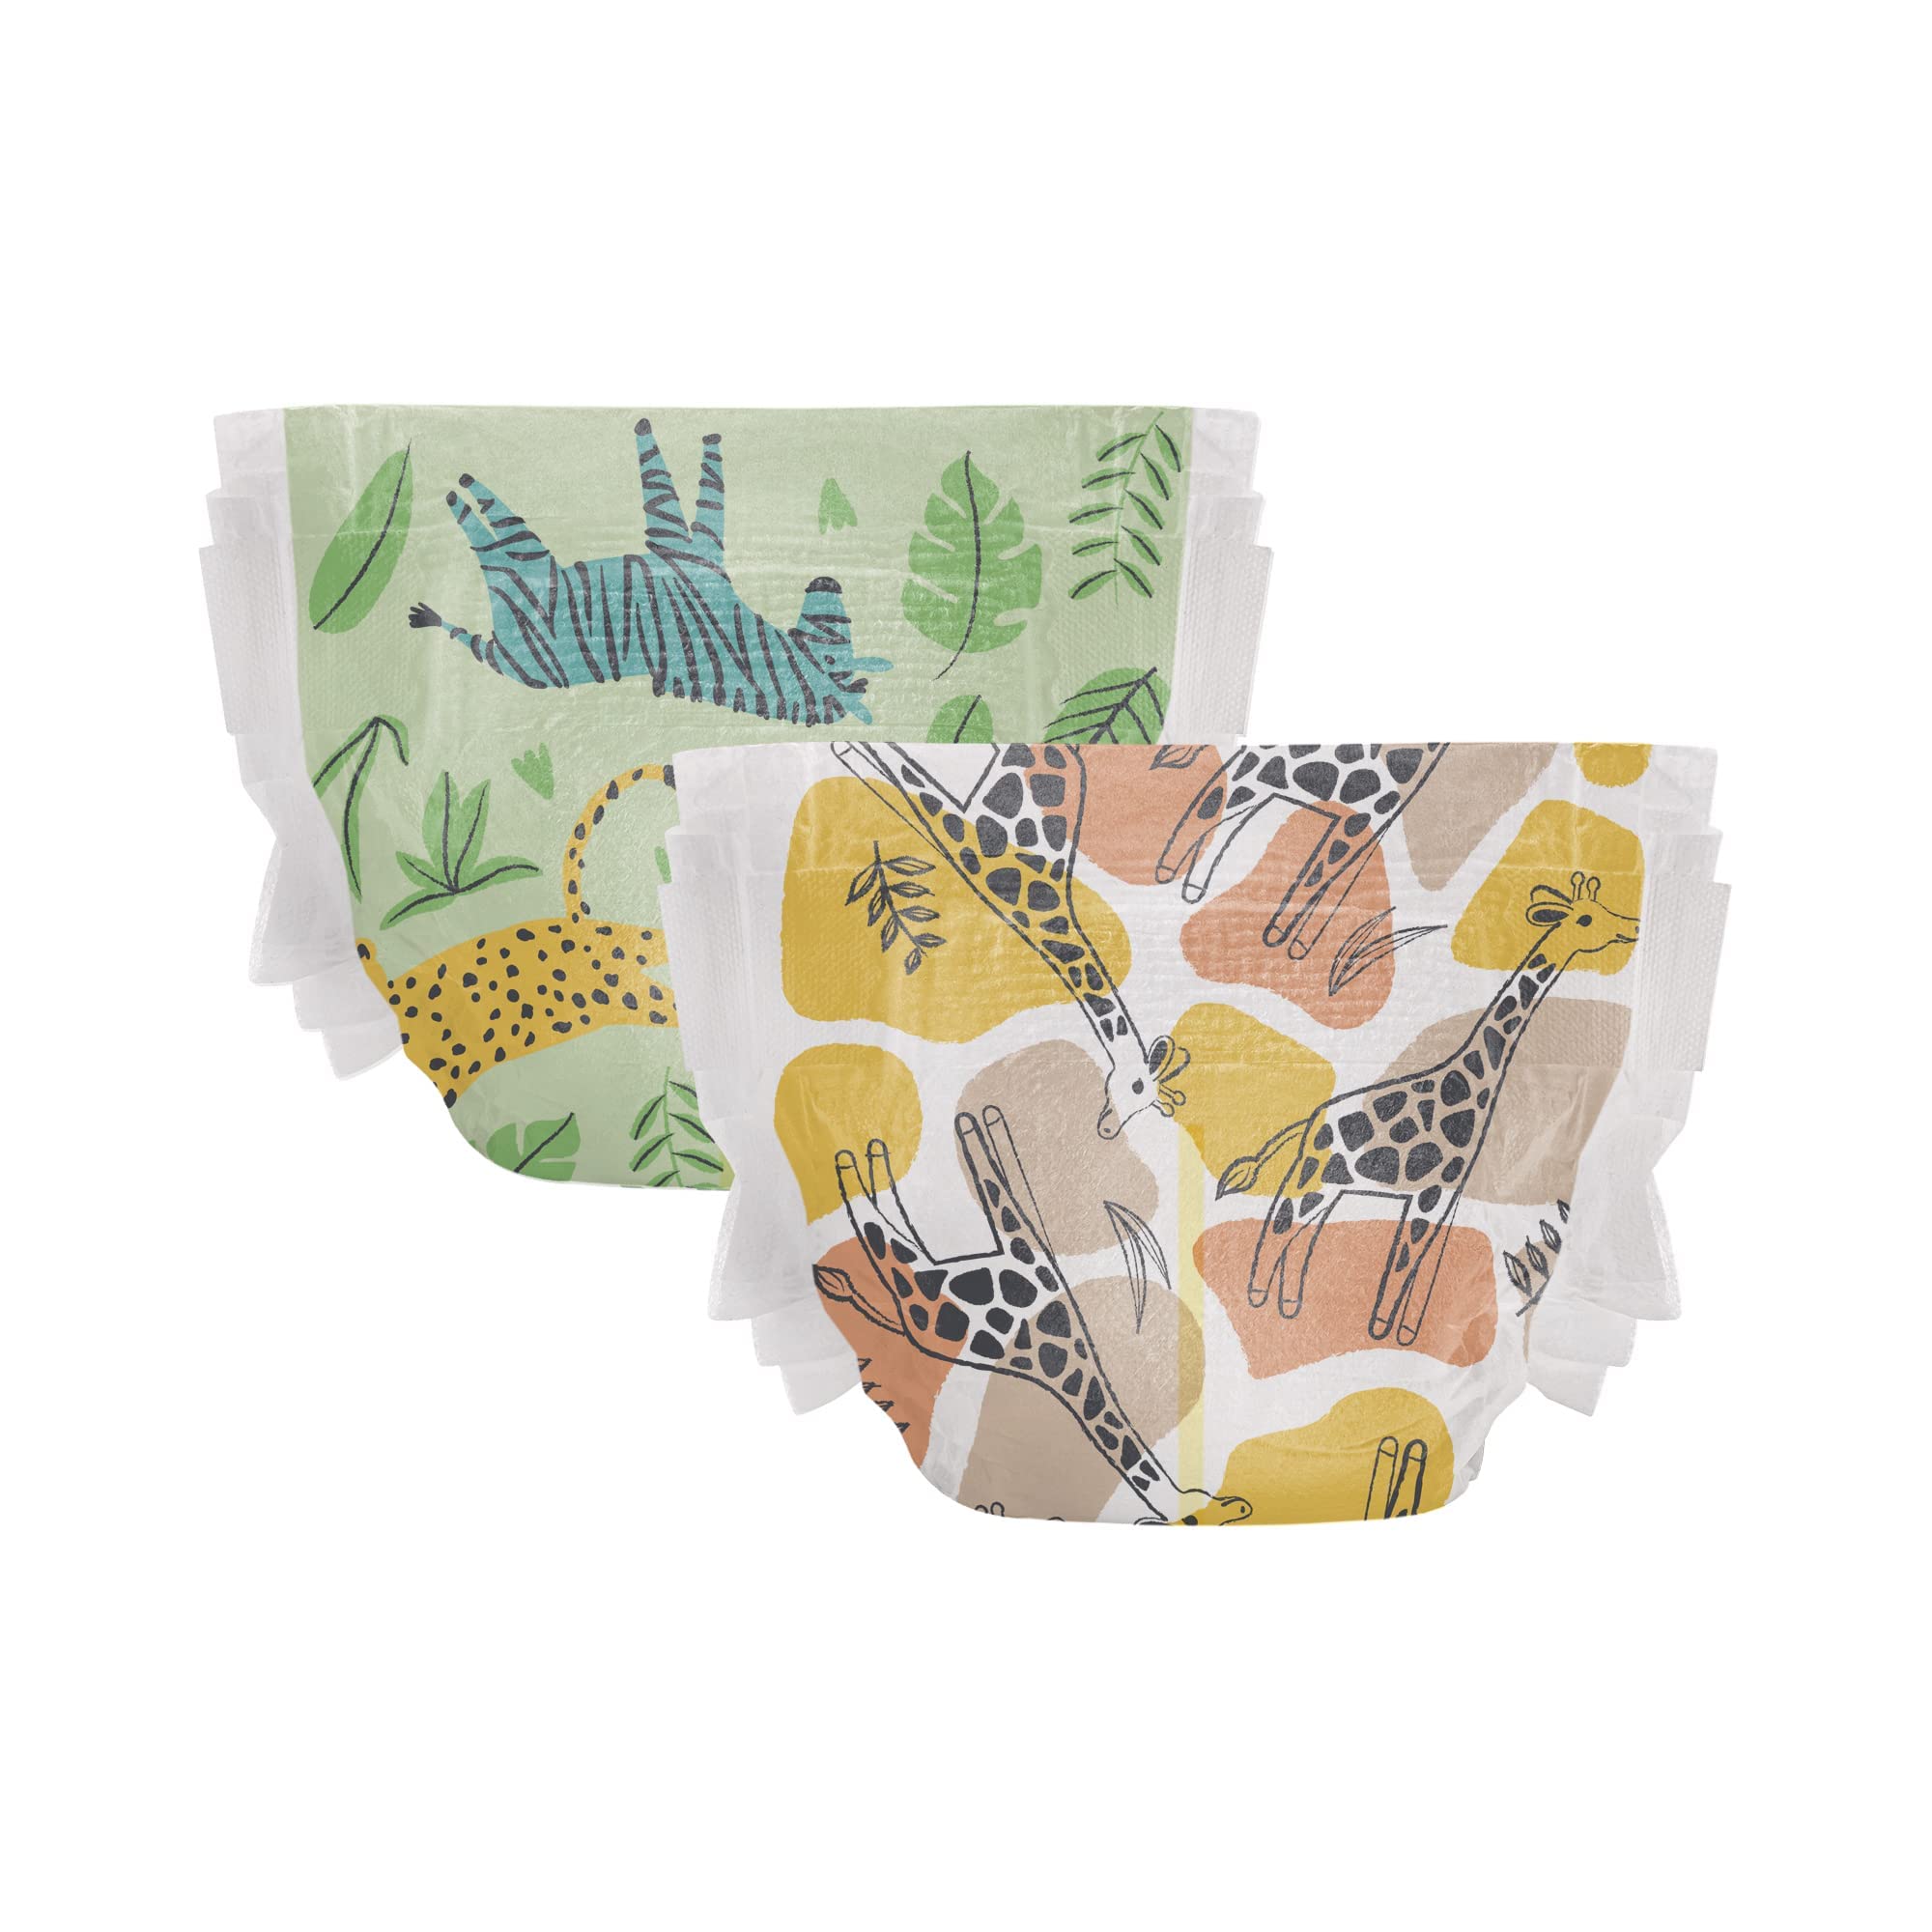 The Honest Company Clean Conscious Diapers | Plant-Based, Sustainable | Stripe Safari & Seeing Spots | Club Box, Size 4 (22-37 lbs), 60 Count